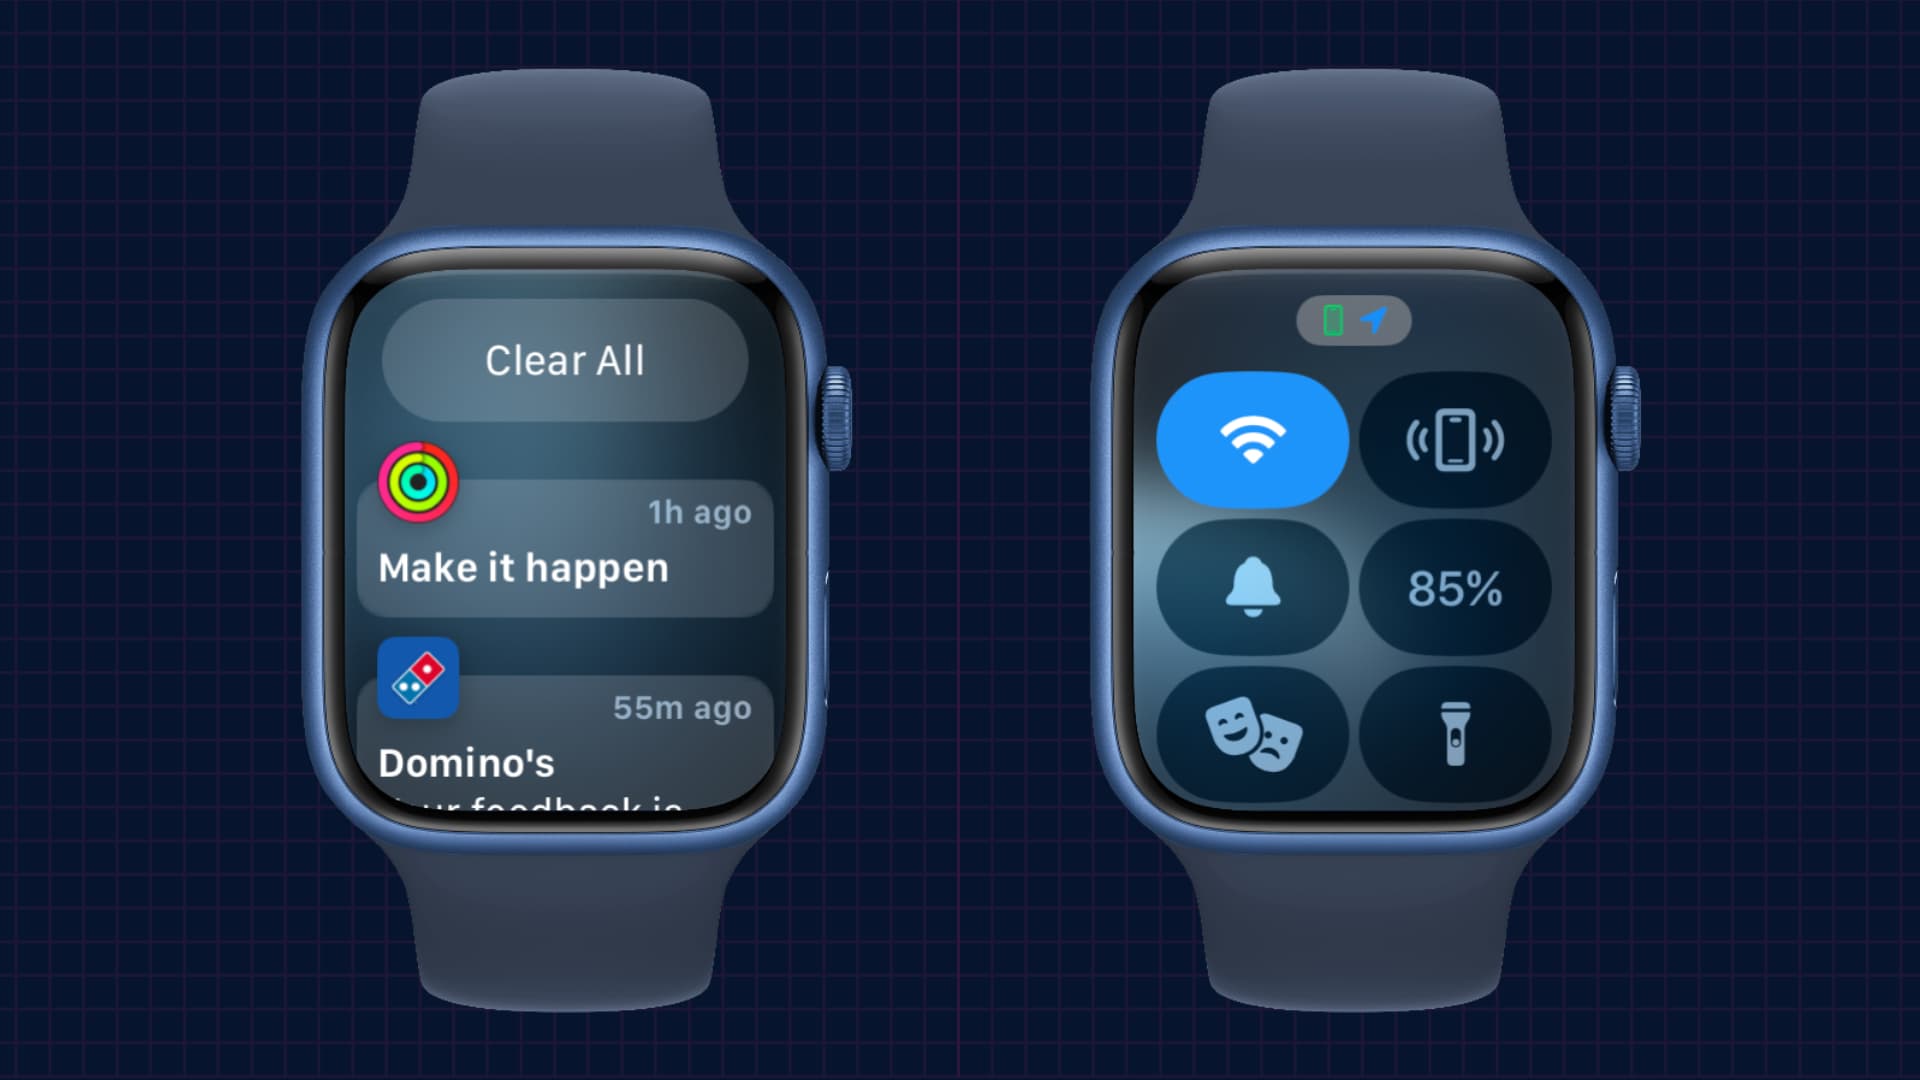 Two Apple Watch mockups showing its Notifications Center and Control Center